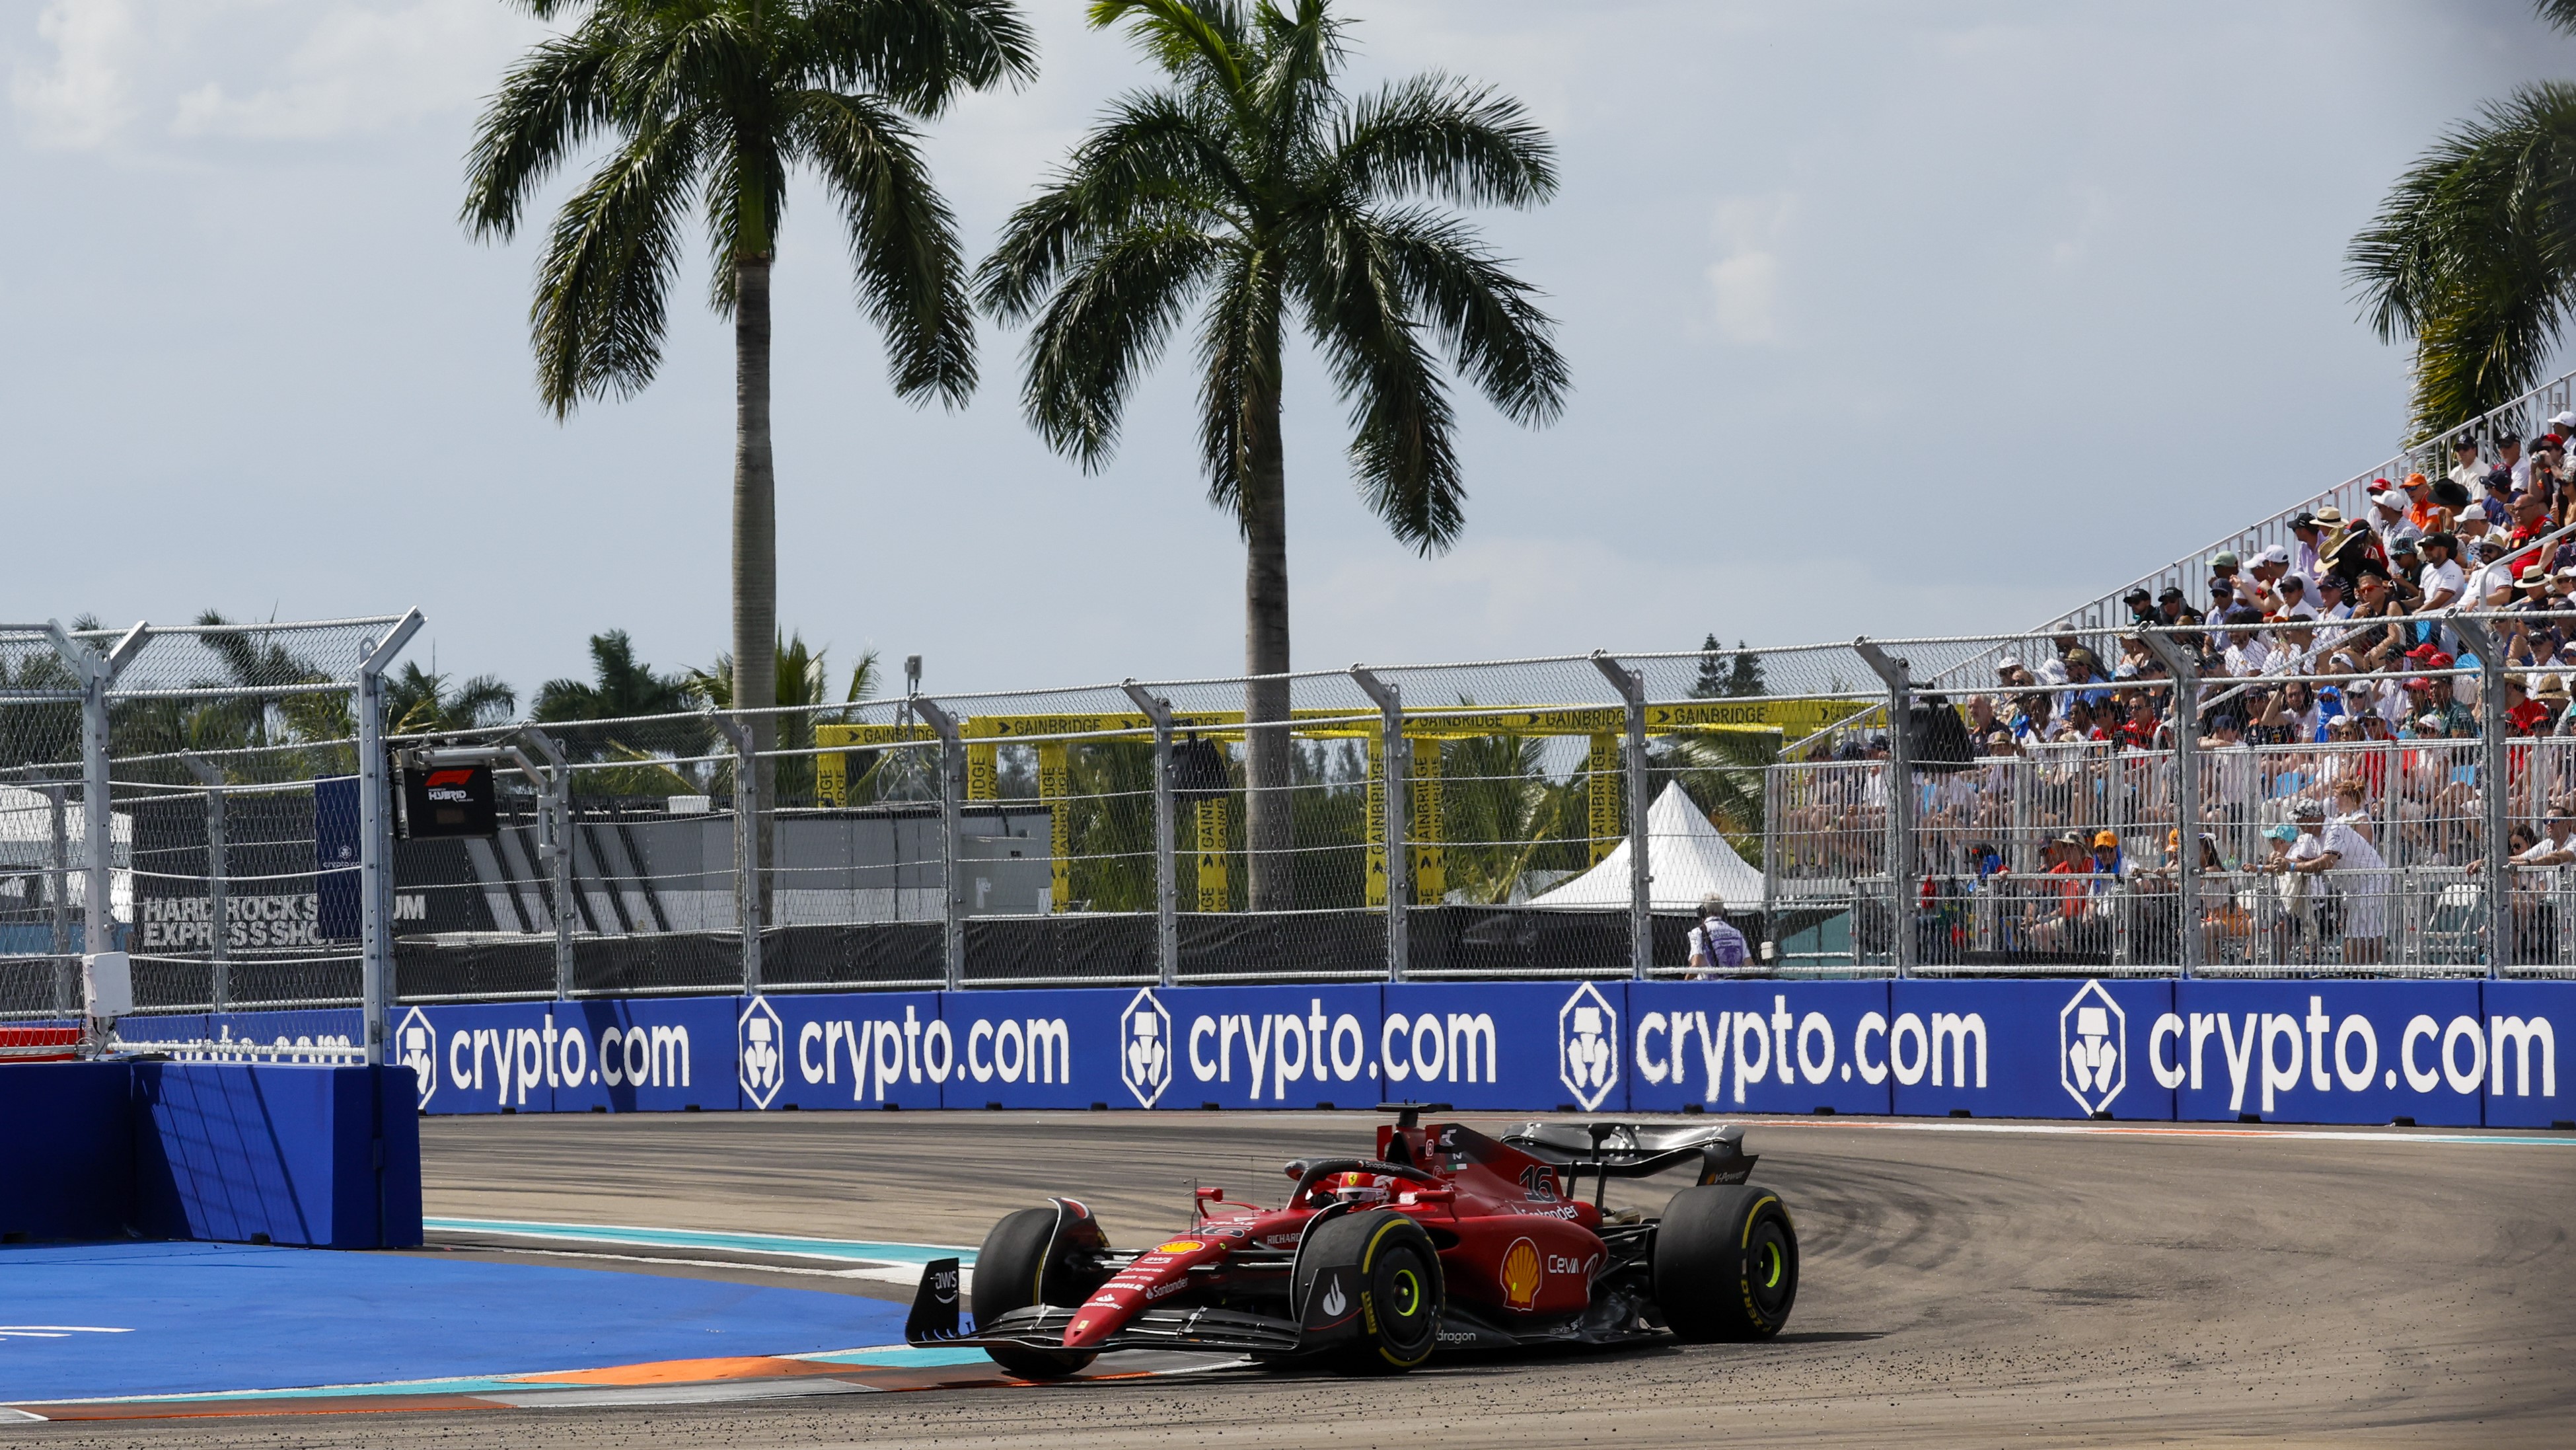 Miami Grand Prix live stream how to watch F1 online from anywhere